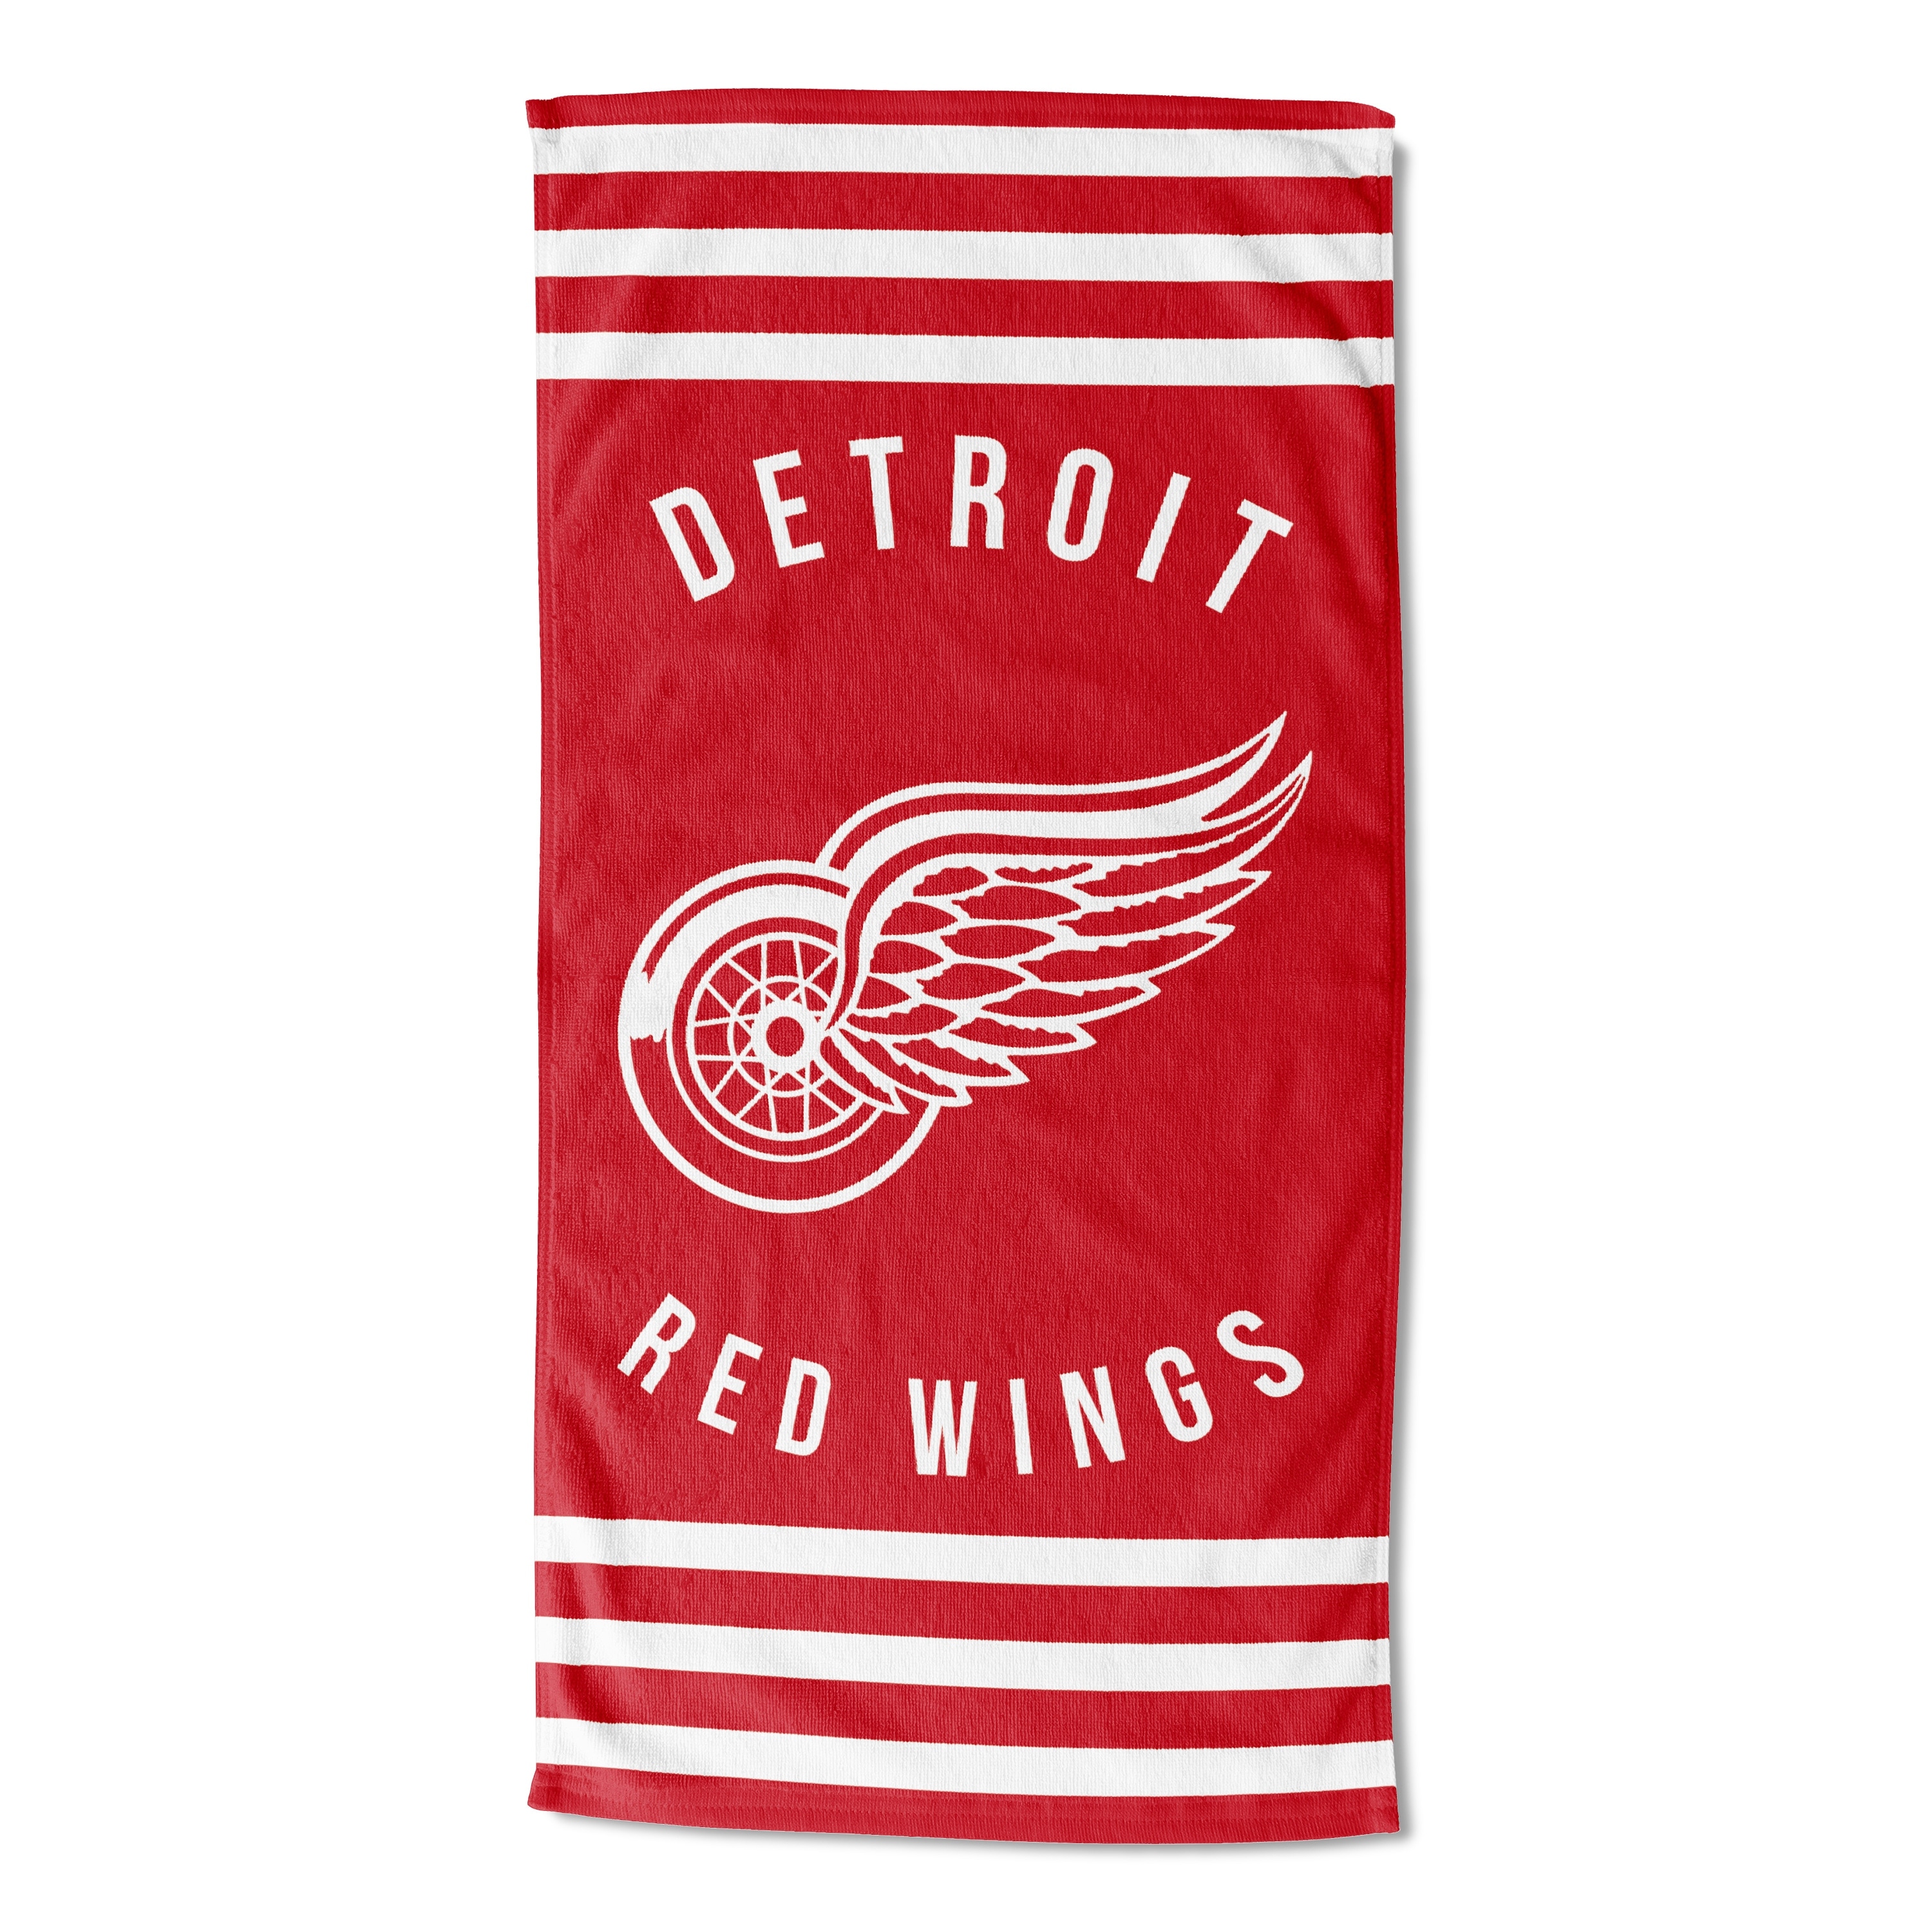 DETROIT RED WINGS NHL Hockey Bedding and Accessories